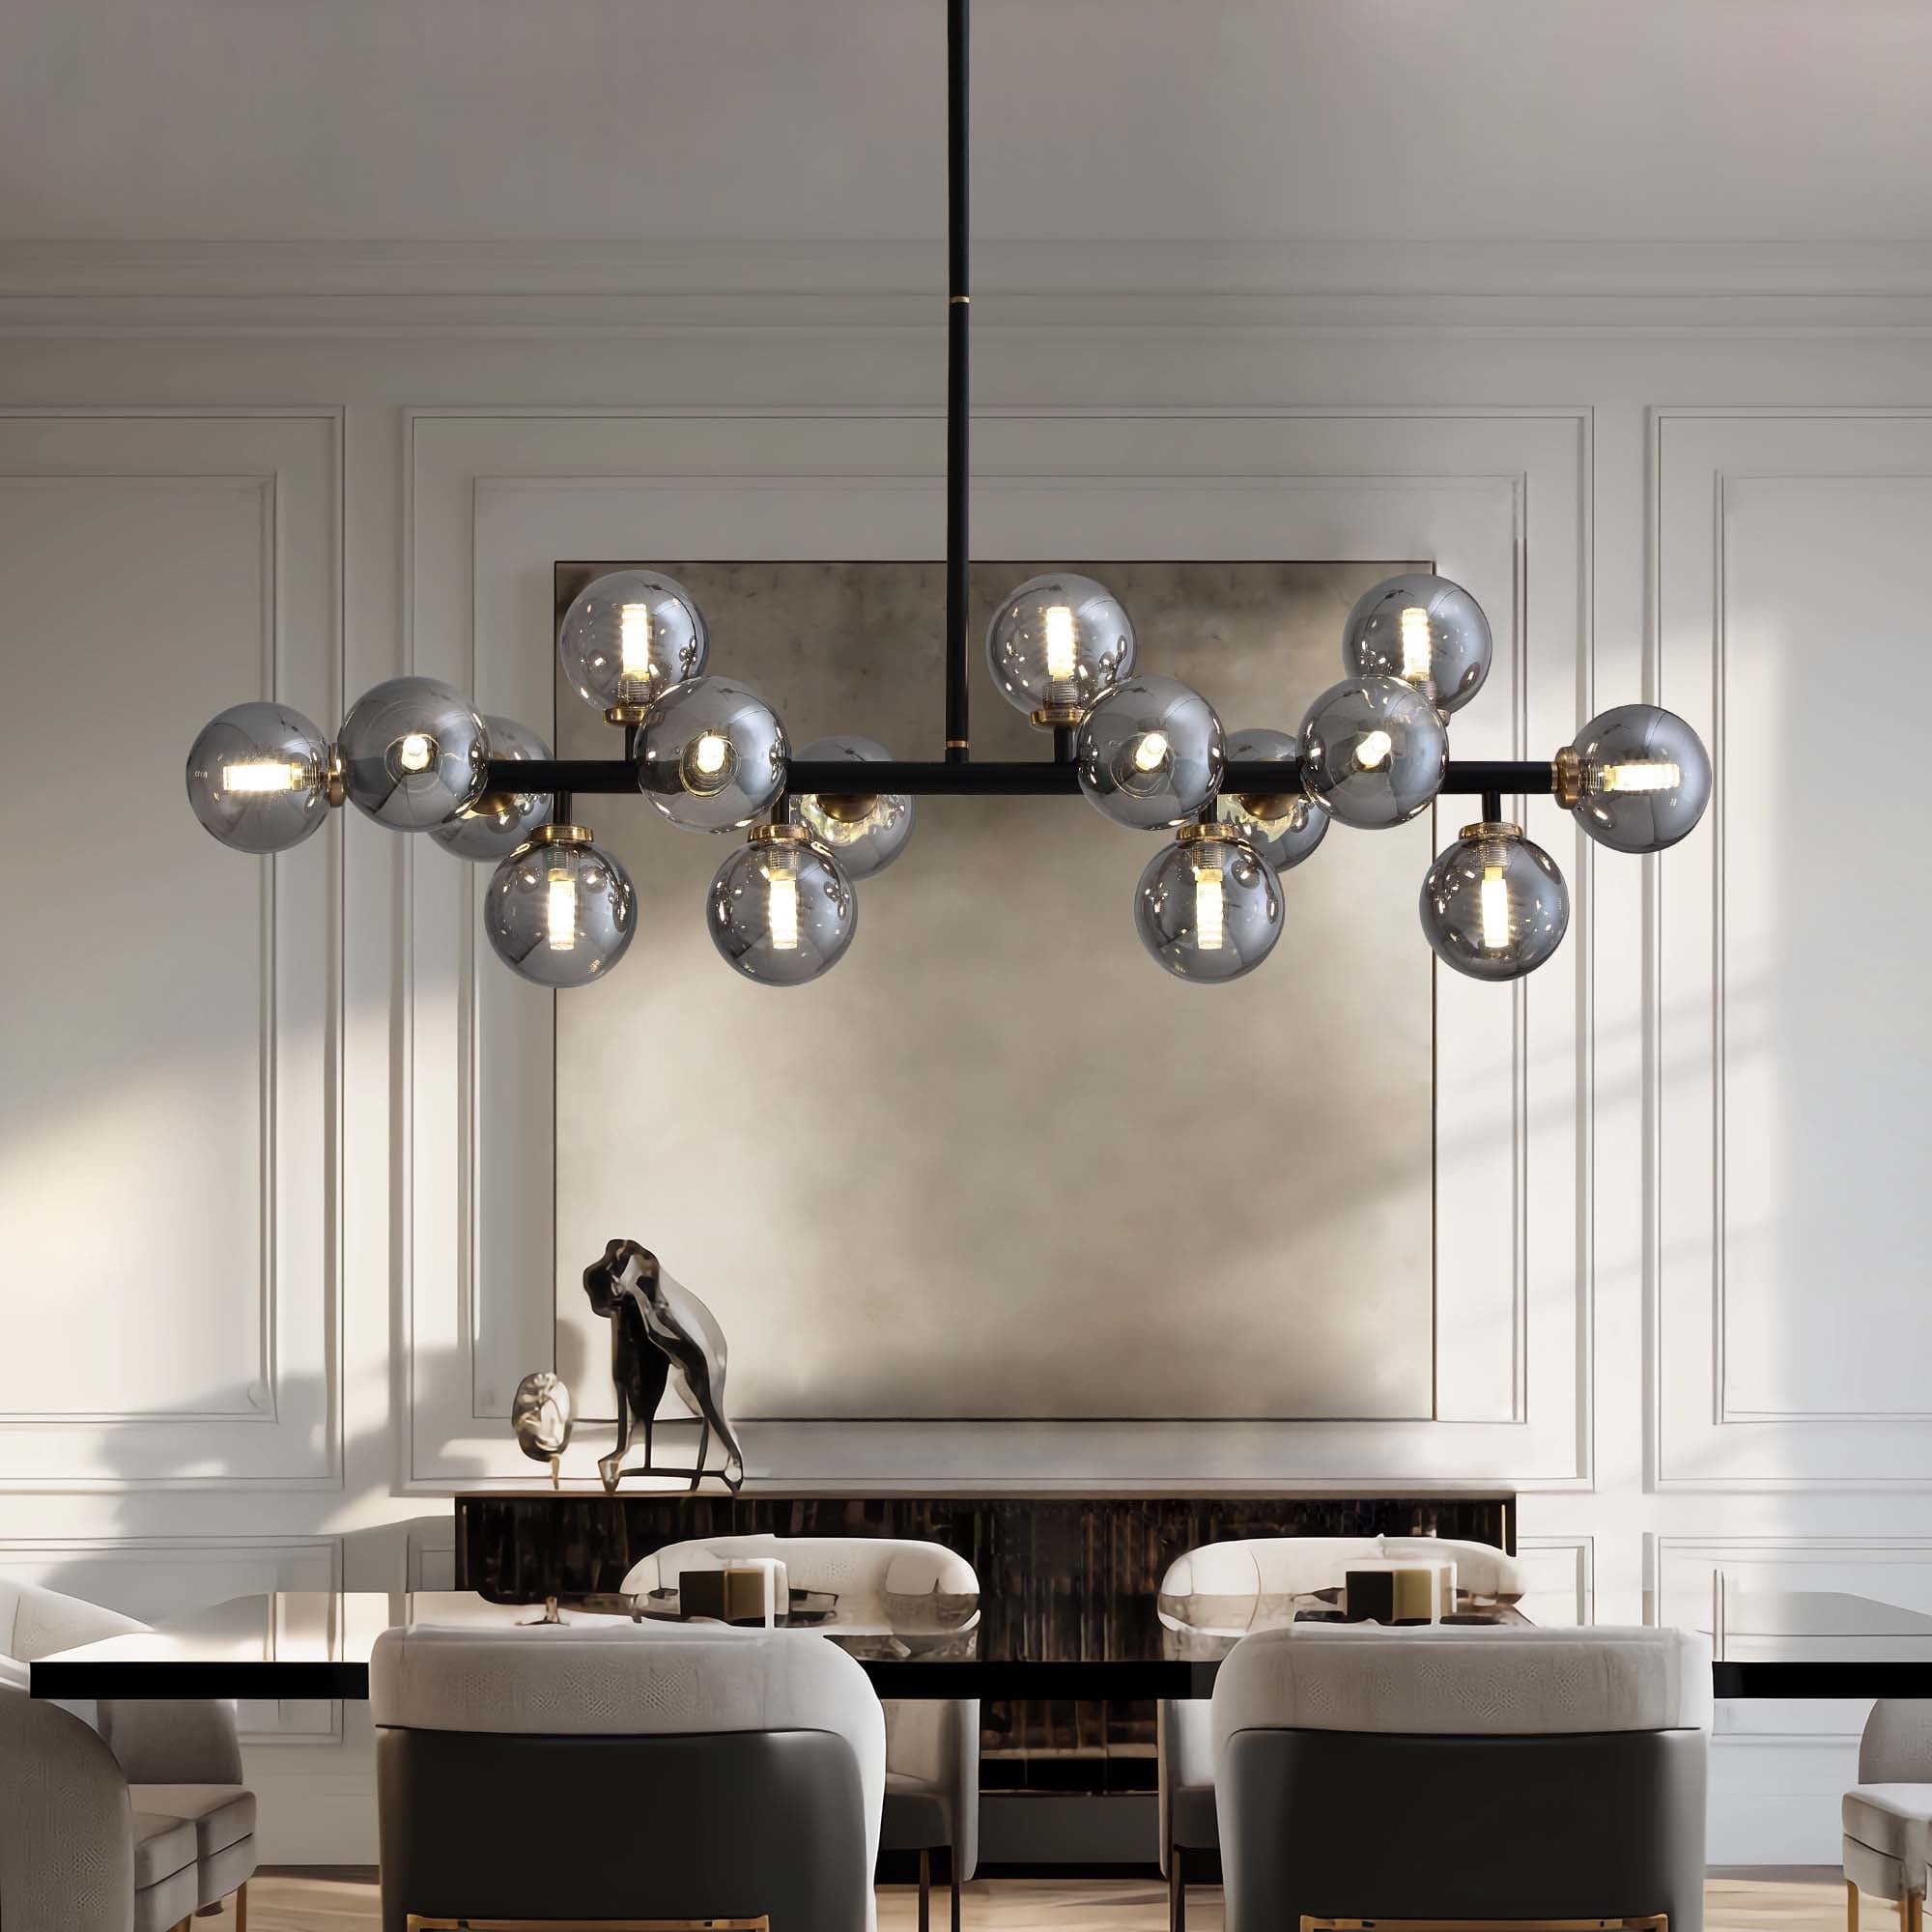 Antoine Modern Linear Dining Room Smoke Glass Black Chandelier 16-Light Modern/Contemporary department and the at Dry Globe Chandeliers rated Gray in